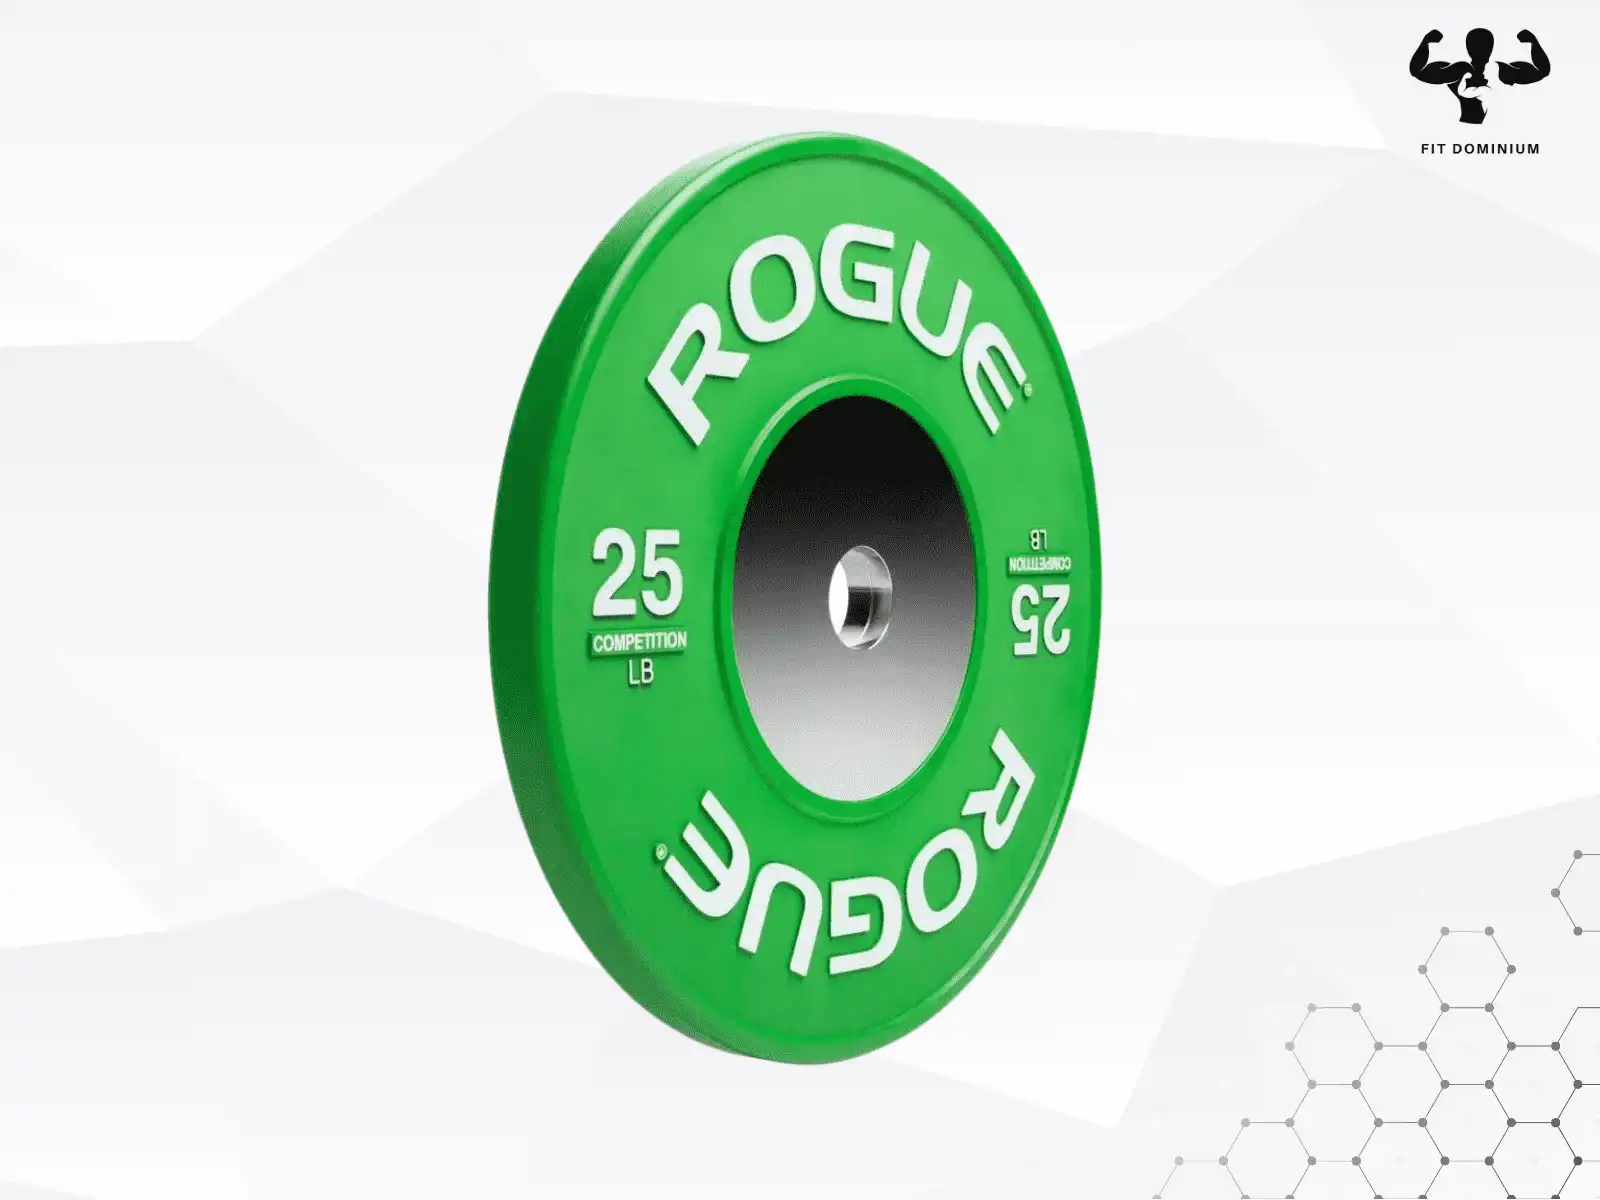 Rogue Competition Bumper Plates